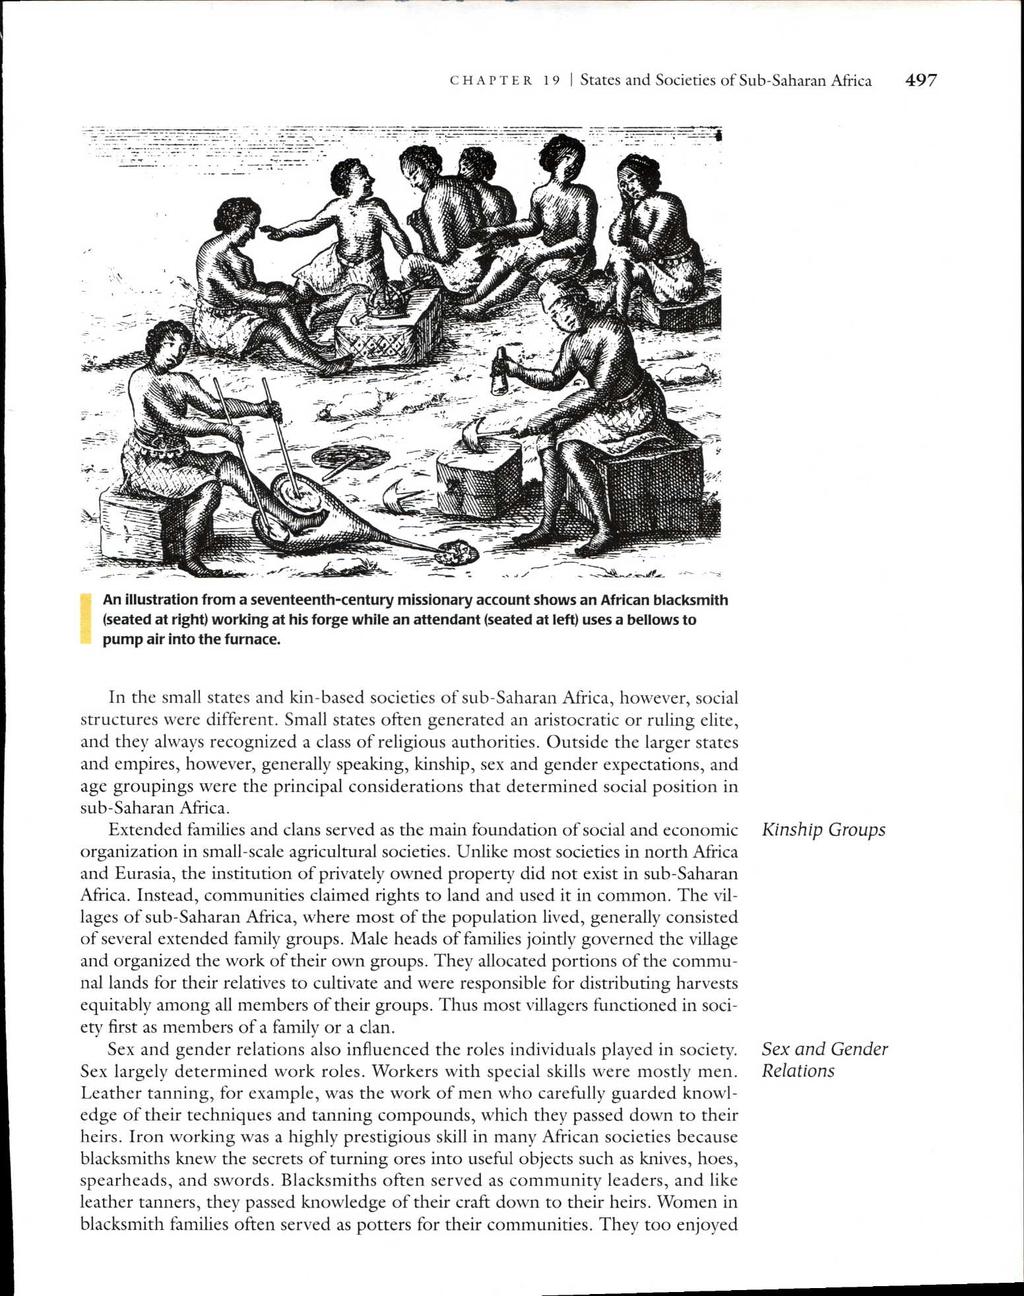 CHAPTER 19 I States and Societies of Sub-Saharan Africa 497 I An illustration from a seventeenth-century missionary account shows an African blacksmith (seated at right) working at his forge while an